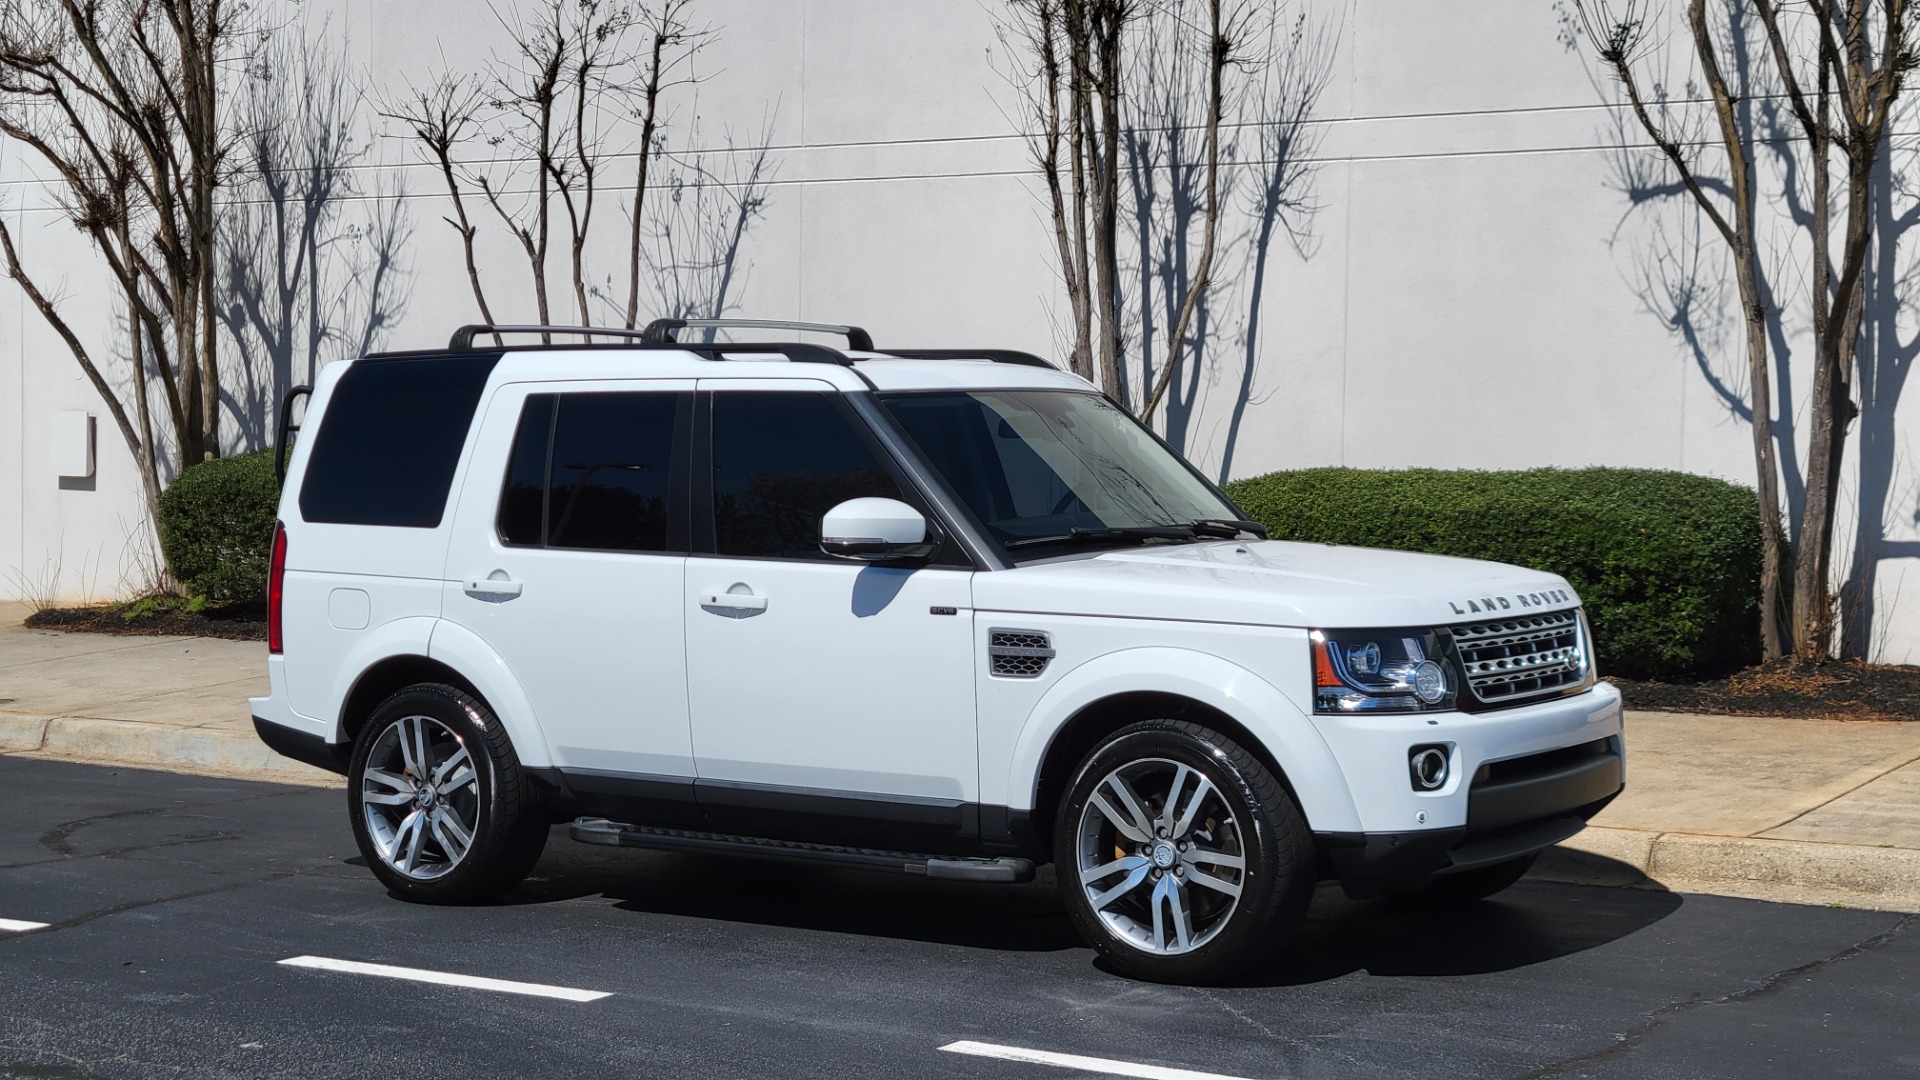 Used 2014 Land Rover LR4 HSE LUX / NAV / SUNROOF / 3-ROW / MERIDIAN / VISION ASST for sale Sold at Formula Imports in Charlotte NC 28227 10